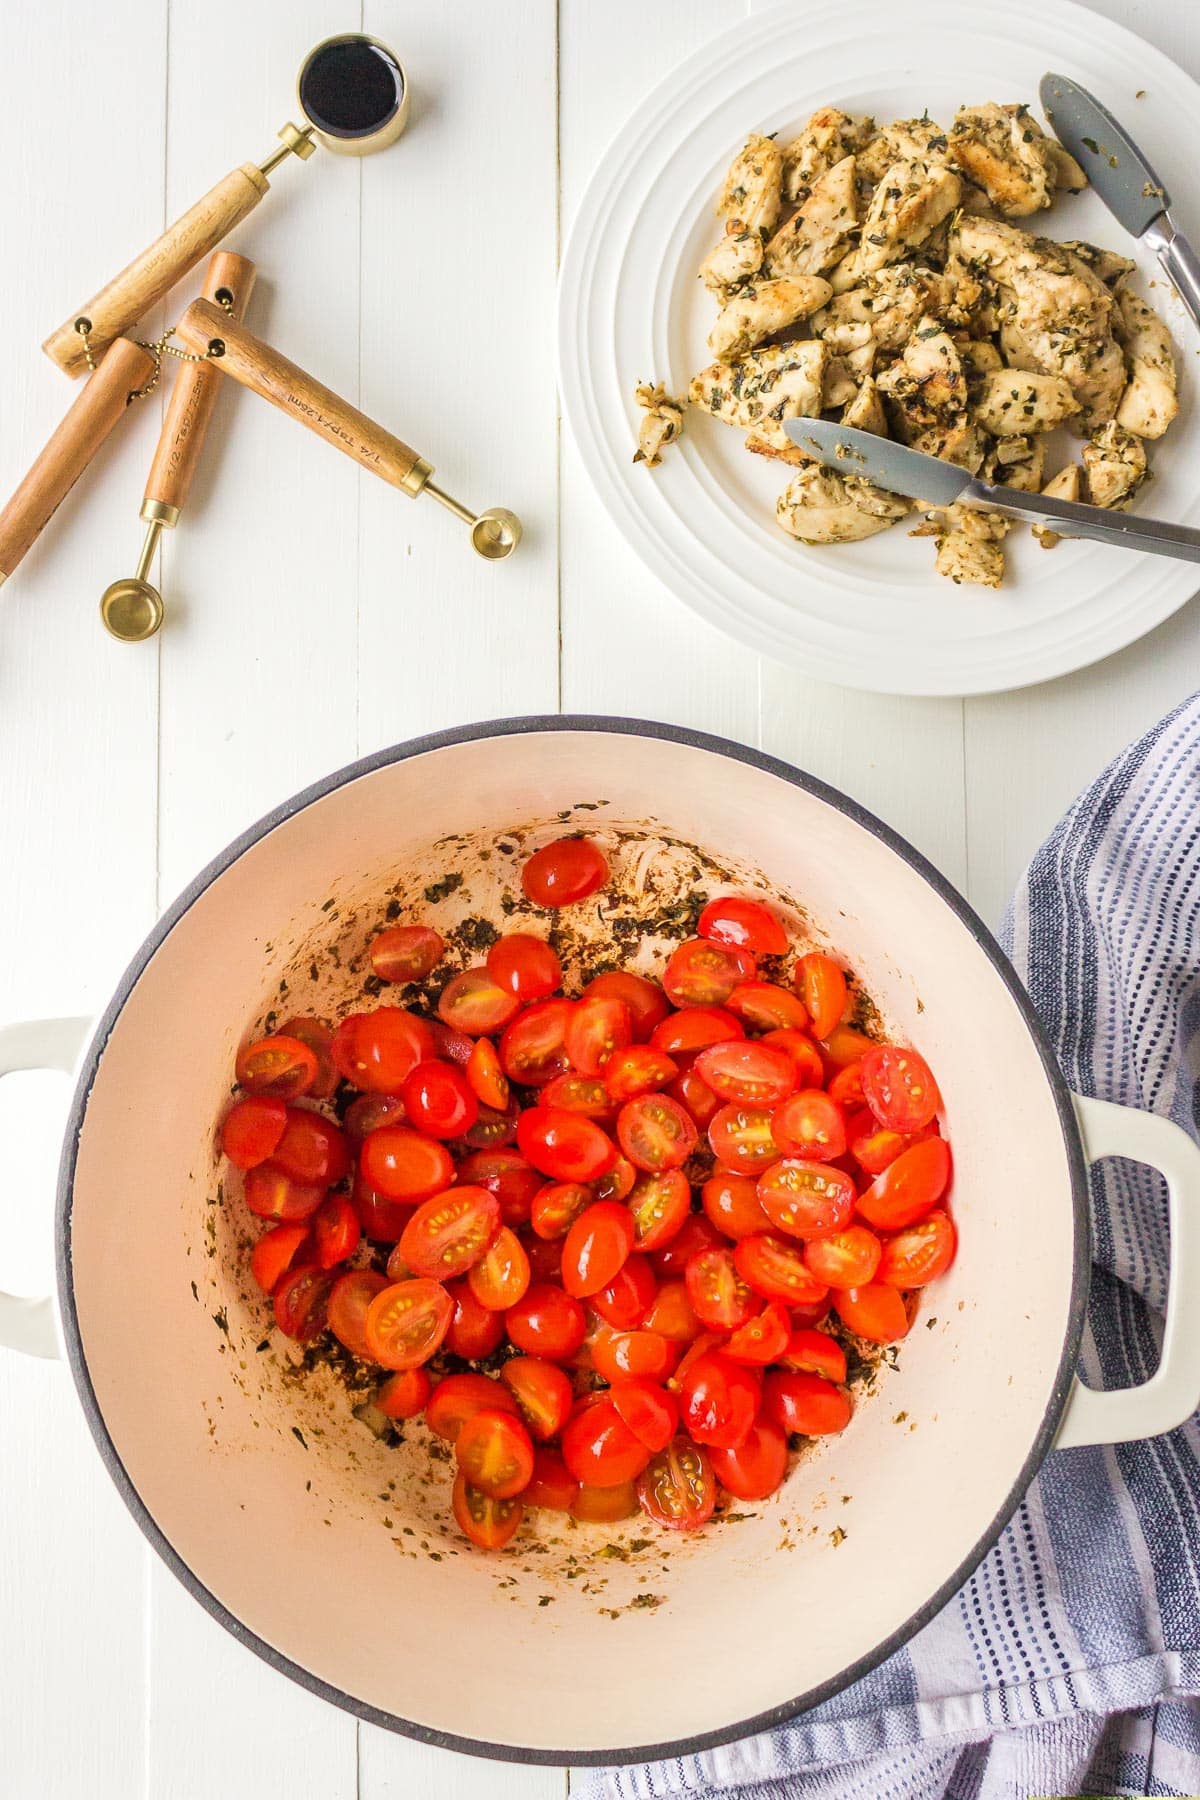 Top view of a pot with cherry tomatoes with cooked chicken and balsamic vinegar nearby.